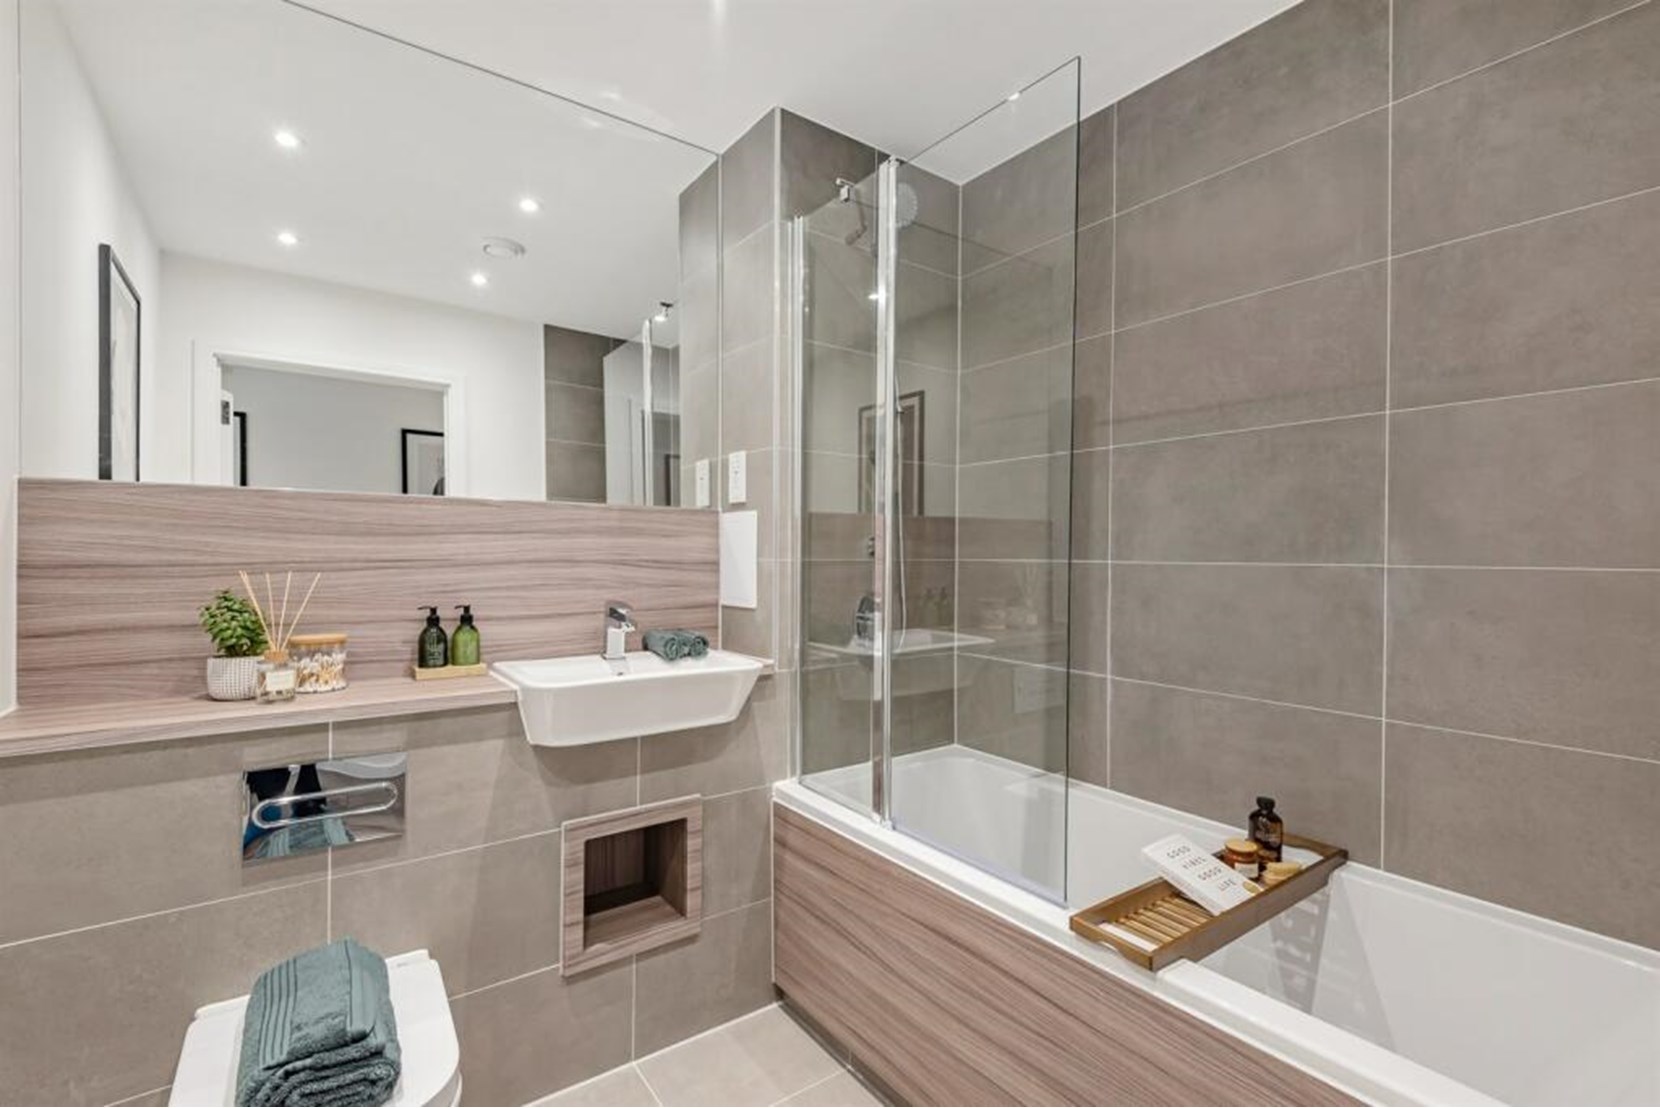 Apartments to Rent by Simple Life London in Beam Park, Havering, RM13, The Everest bathroom